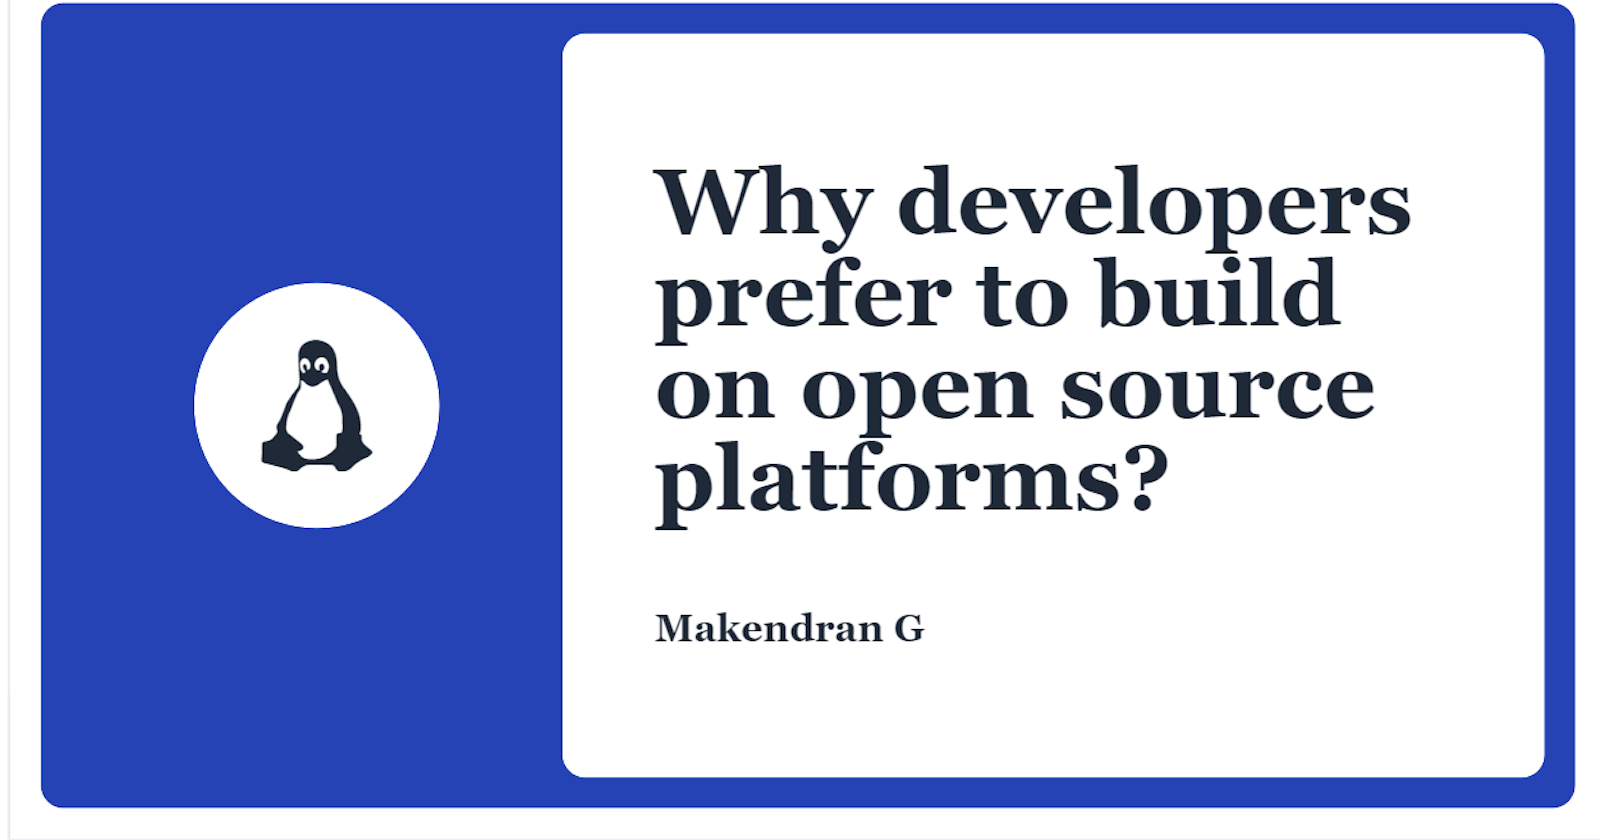 Why developers prefer to build on open source platforms?